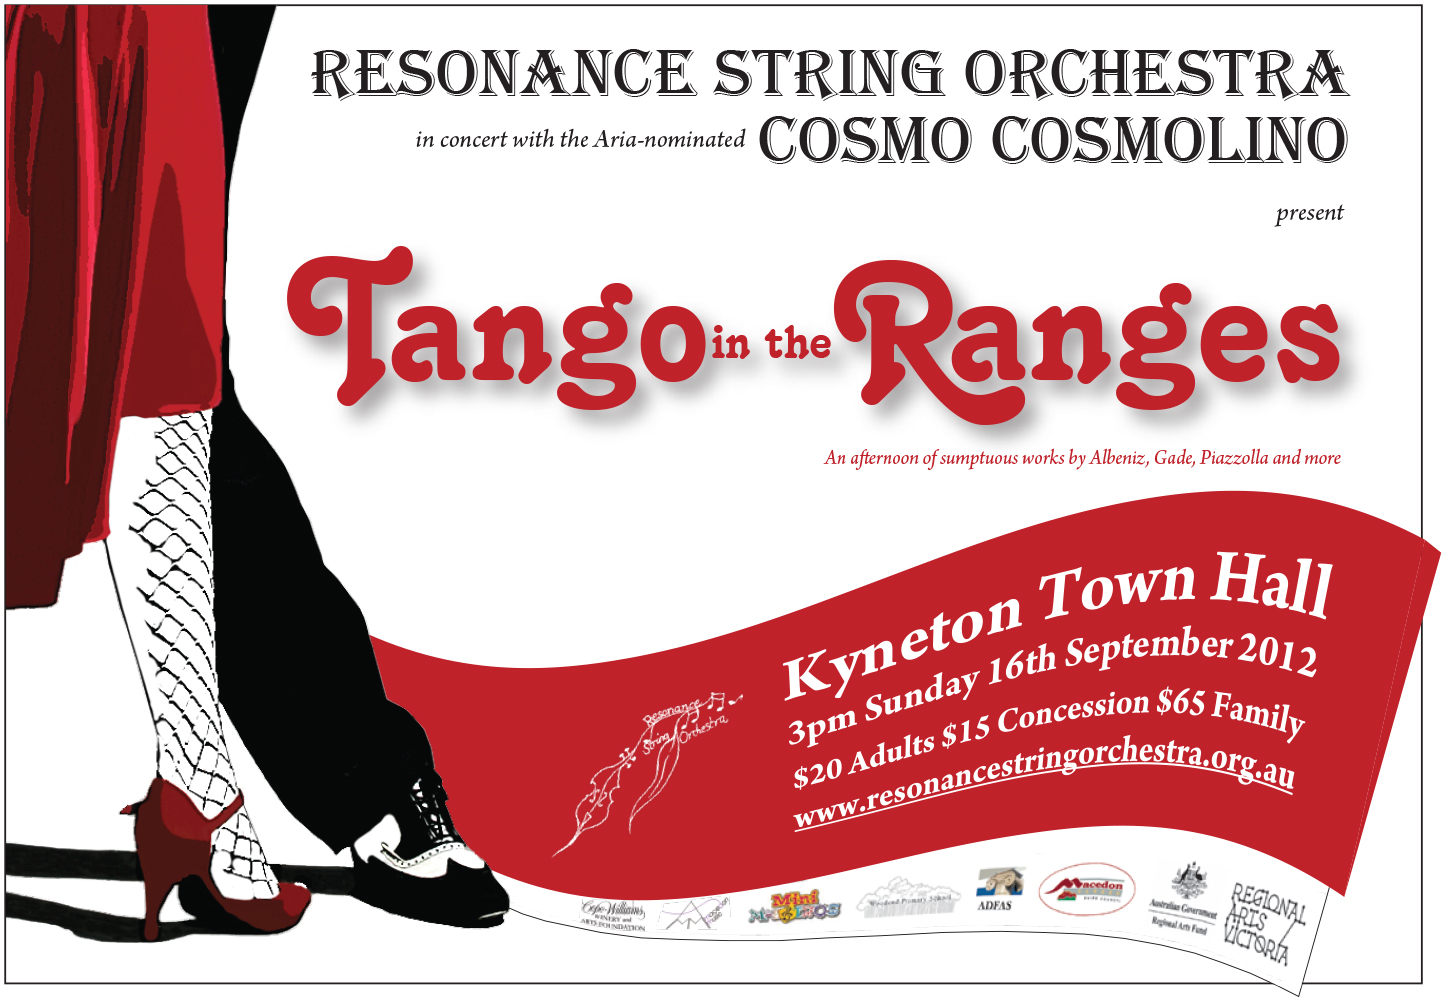 Tango in the Ranges Poster 2012.jpg